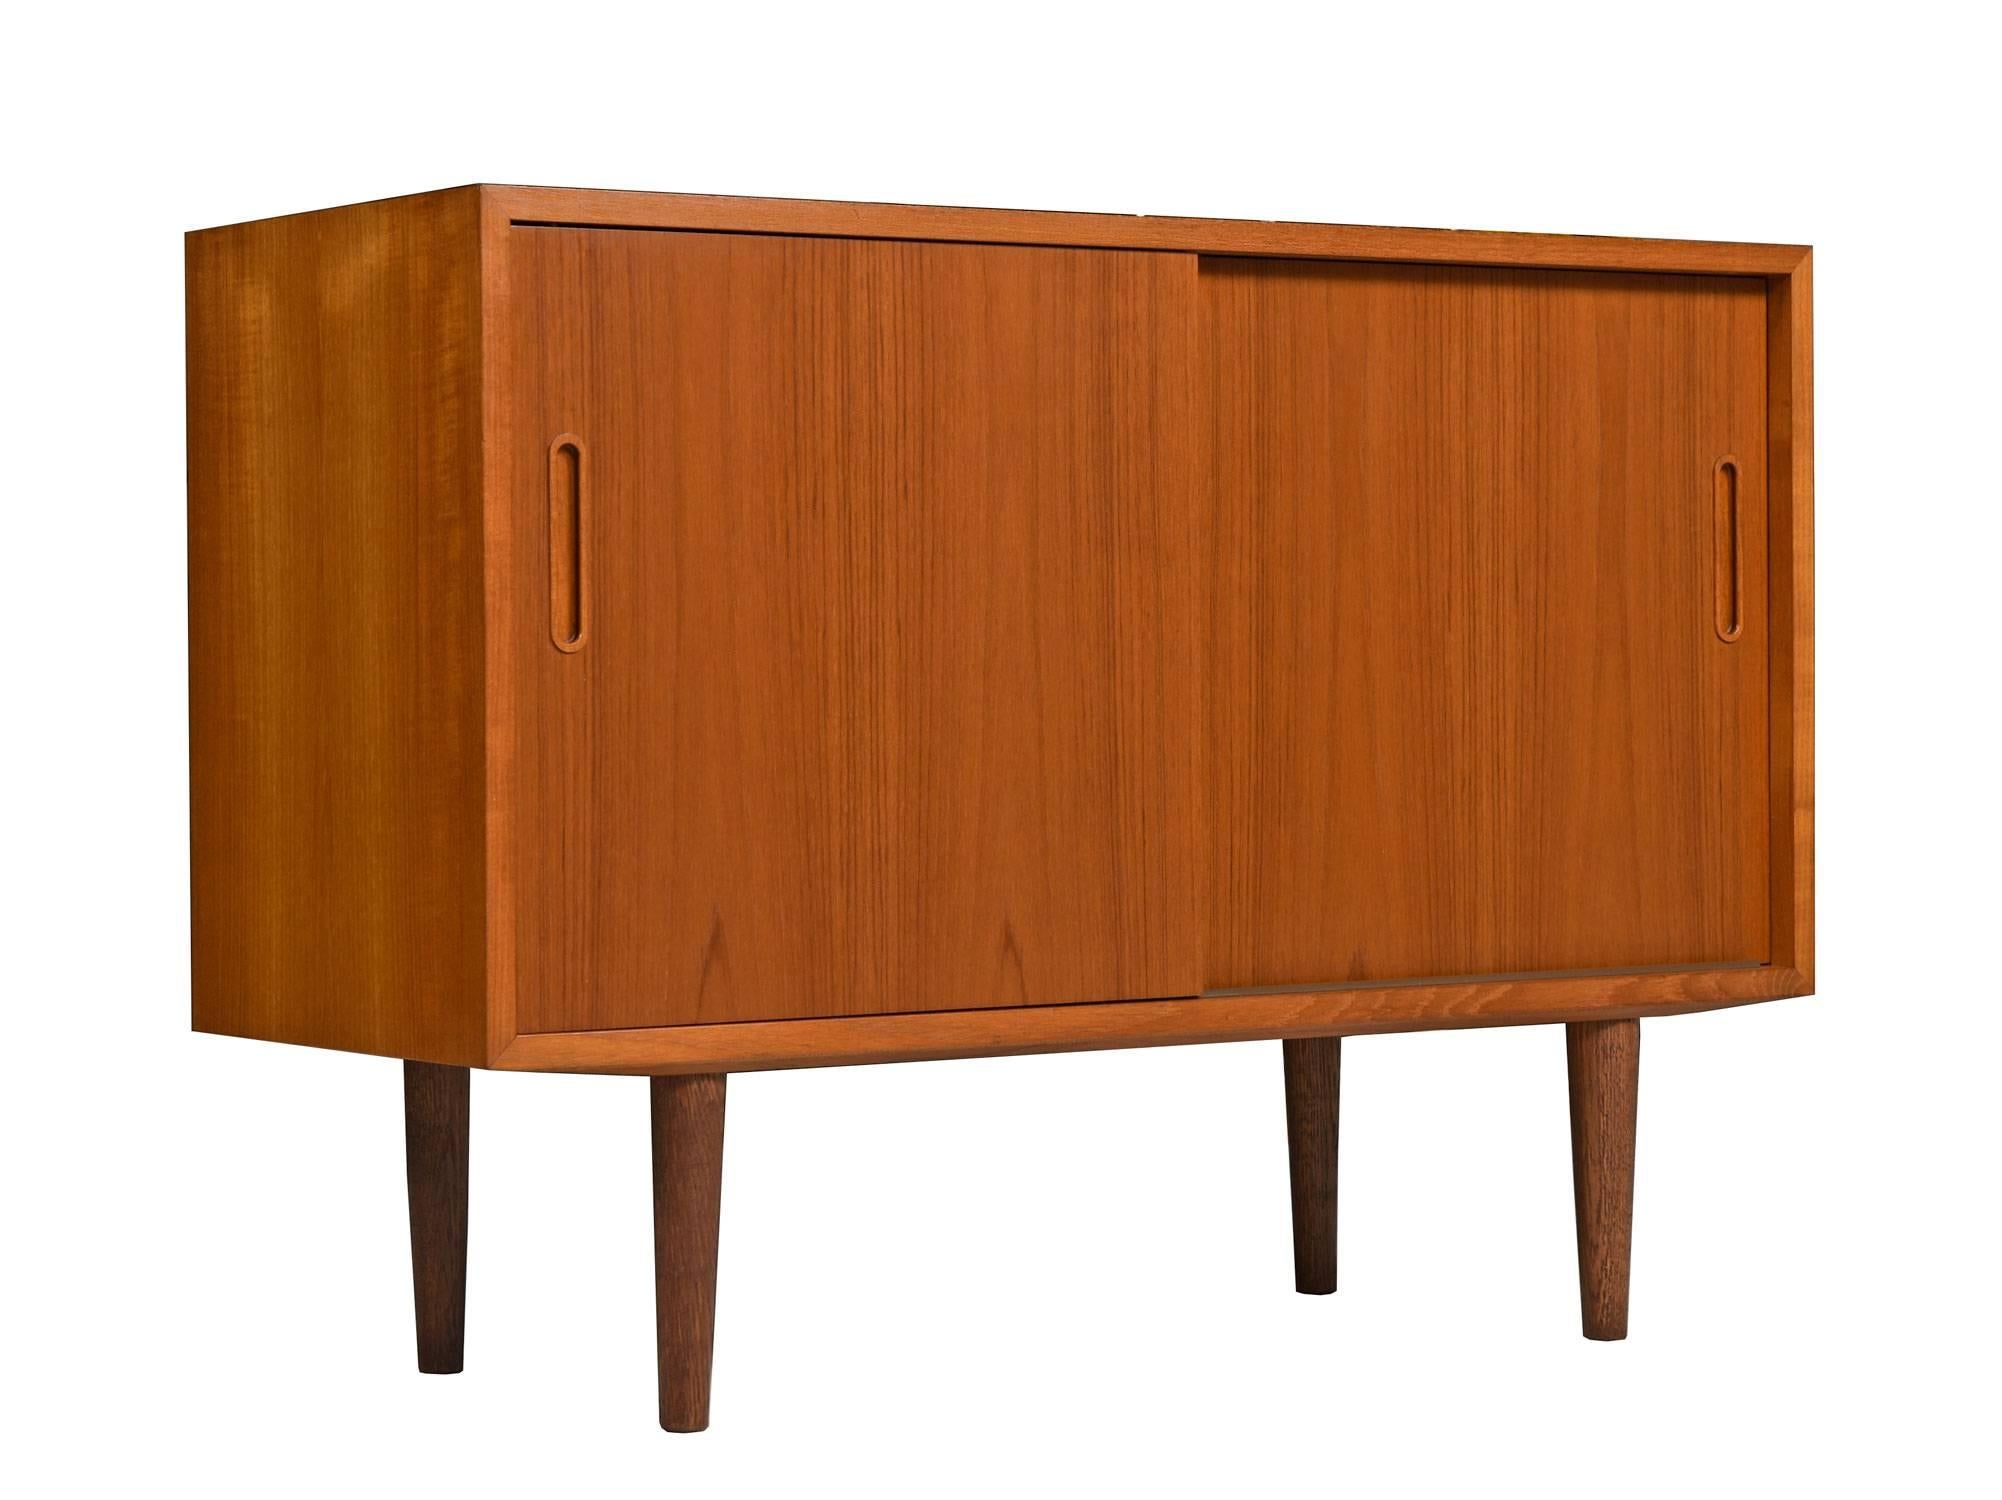 Two Mid-Century Modern Danish teak credenzas by Poul Hundevad. Both credenzas have the same configuration with cabinet space, adjustable shelves and a single felt-lined drawer at top left. Stamped with the maker's mark and Danish Control stamp.